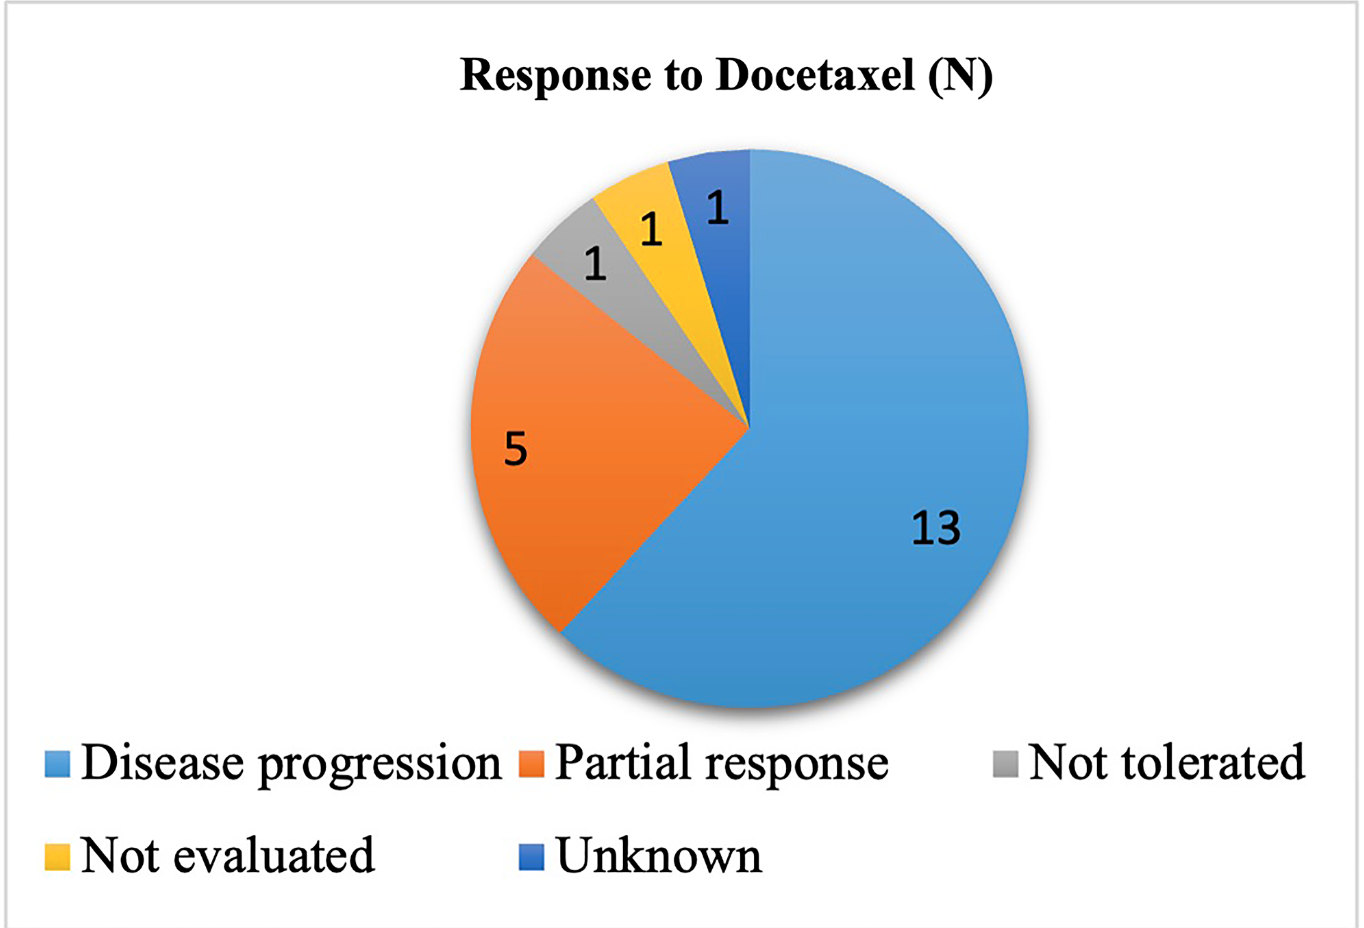 Figure 1: Response to docetaxel in second or third line treatment for non-small cell lung cancer after a treatment with chemo-immunotherapy.